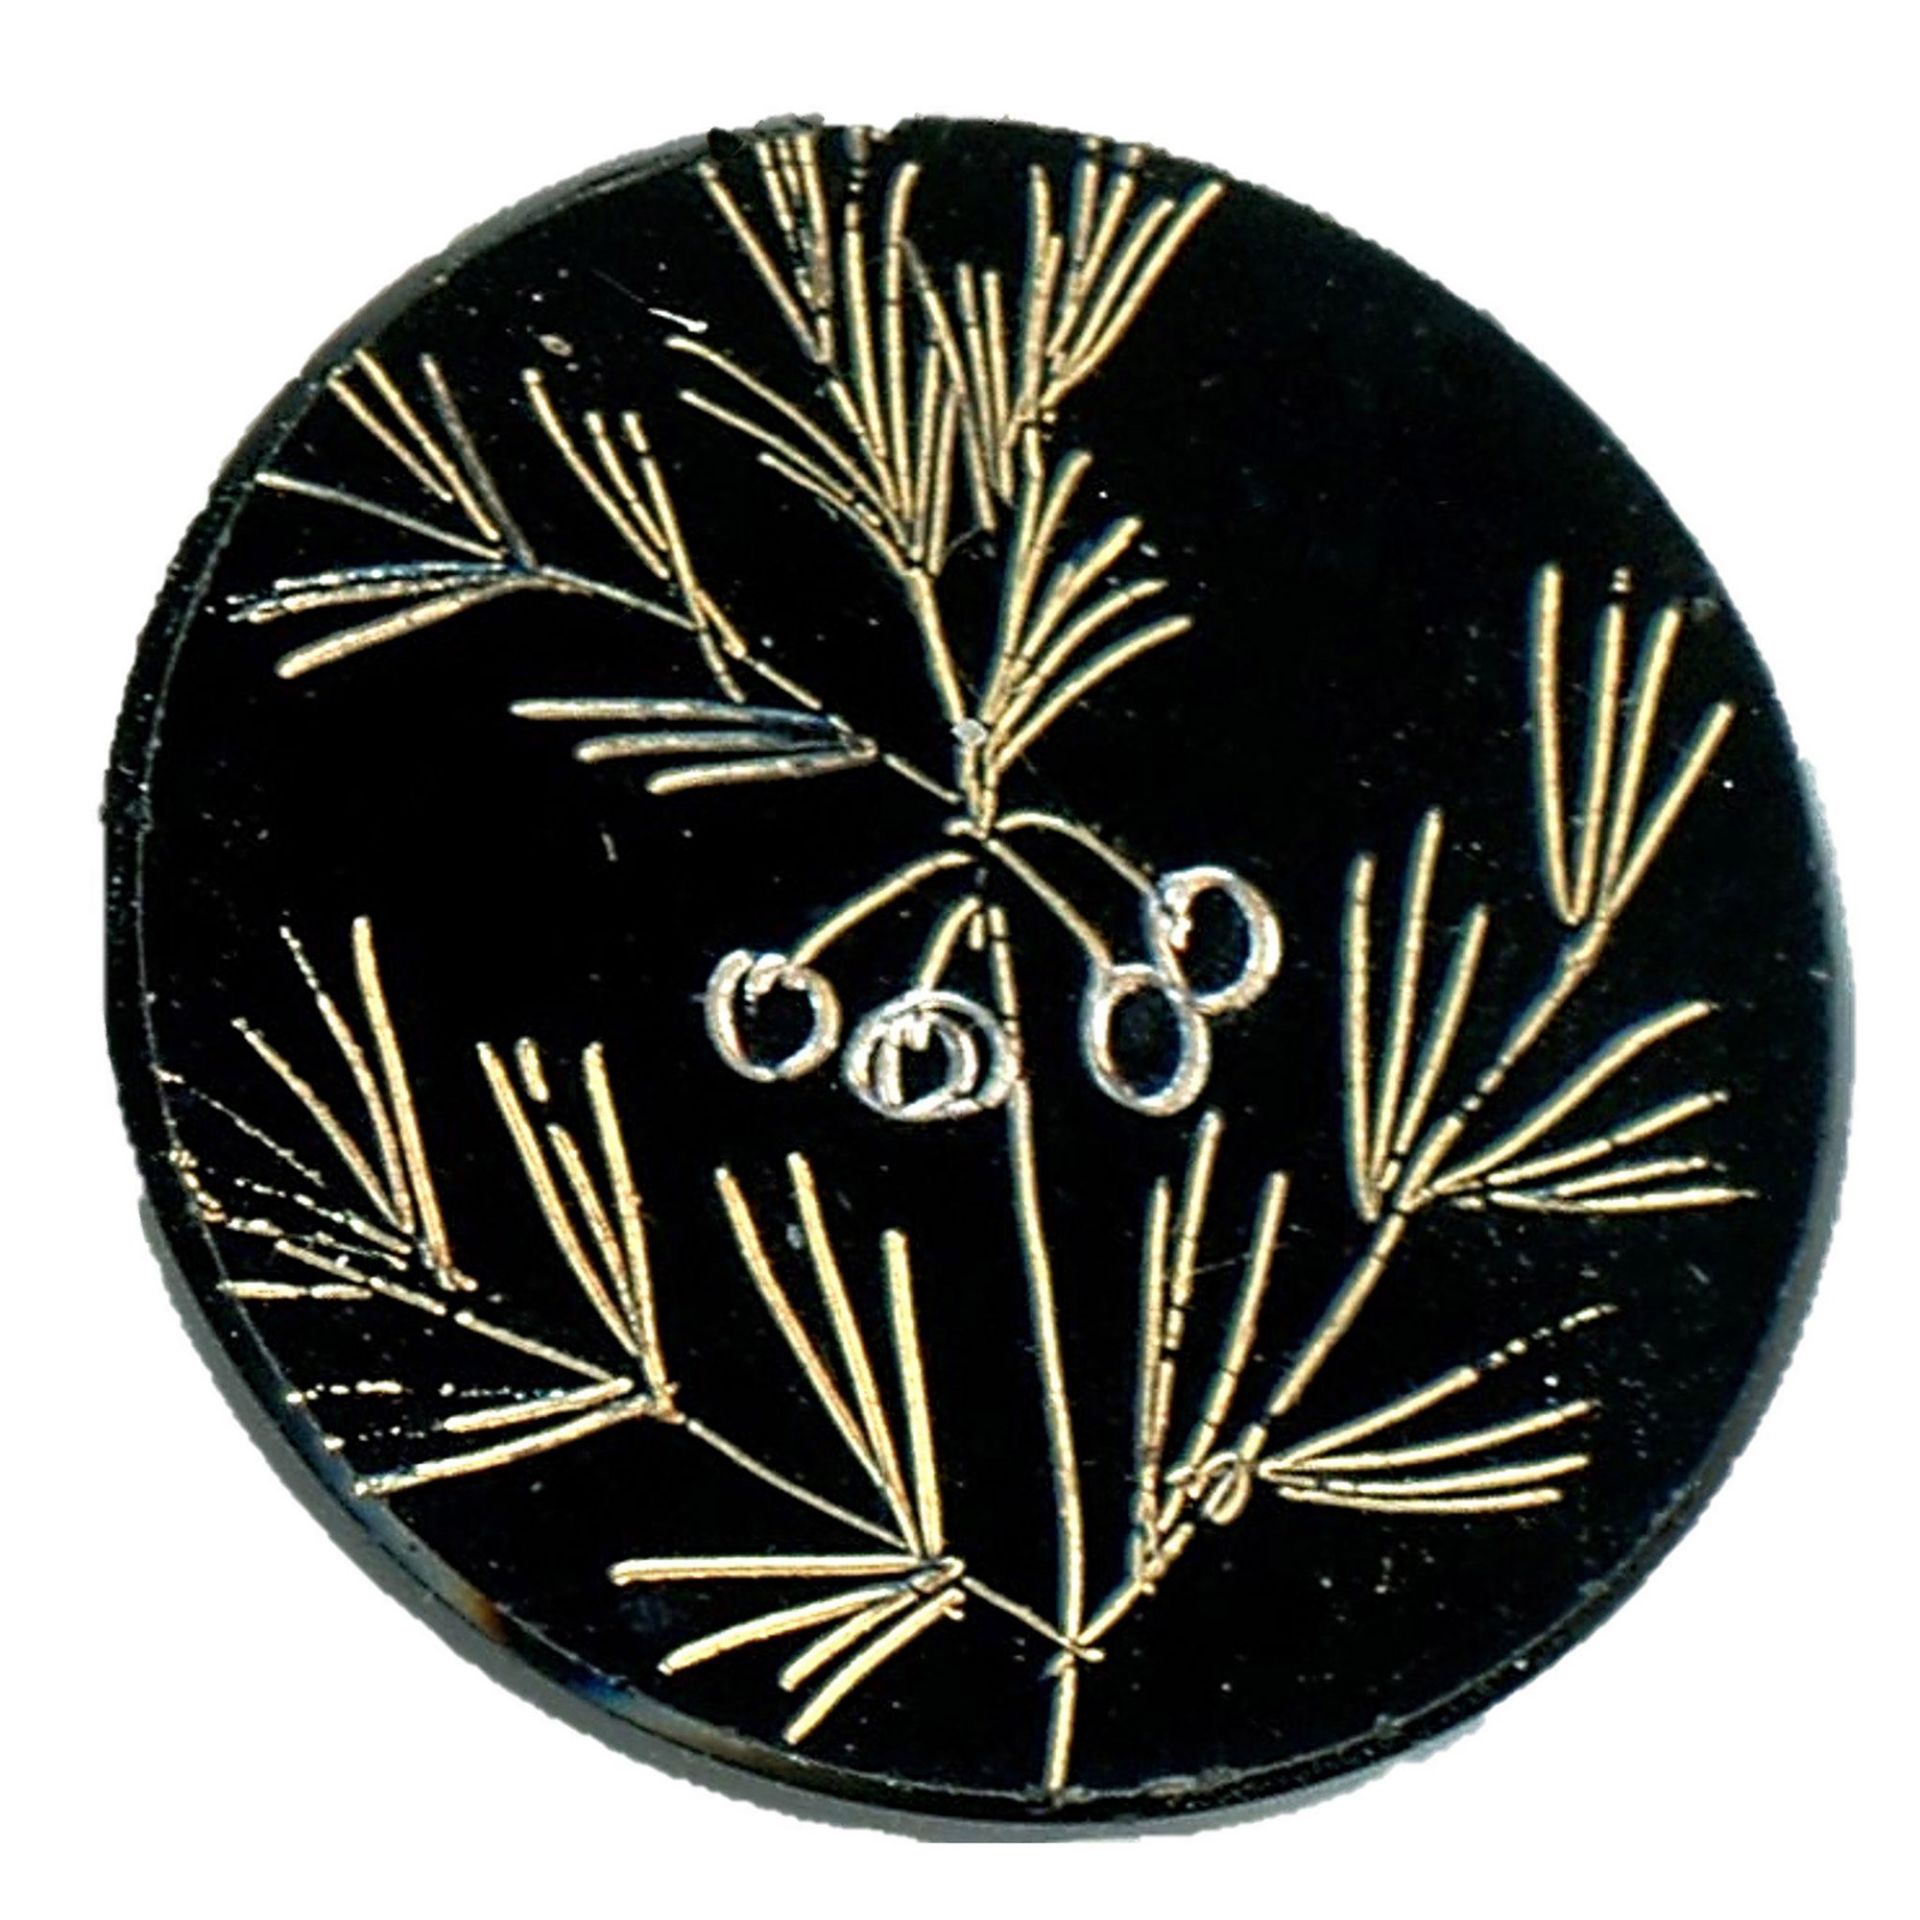 A card of division one black glass assorted buttons - Image 3 of 4